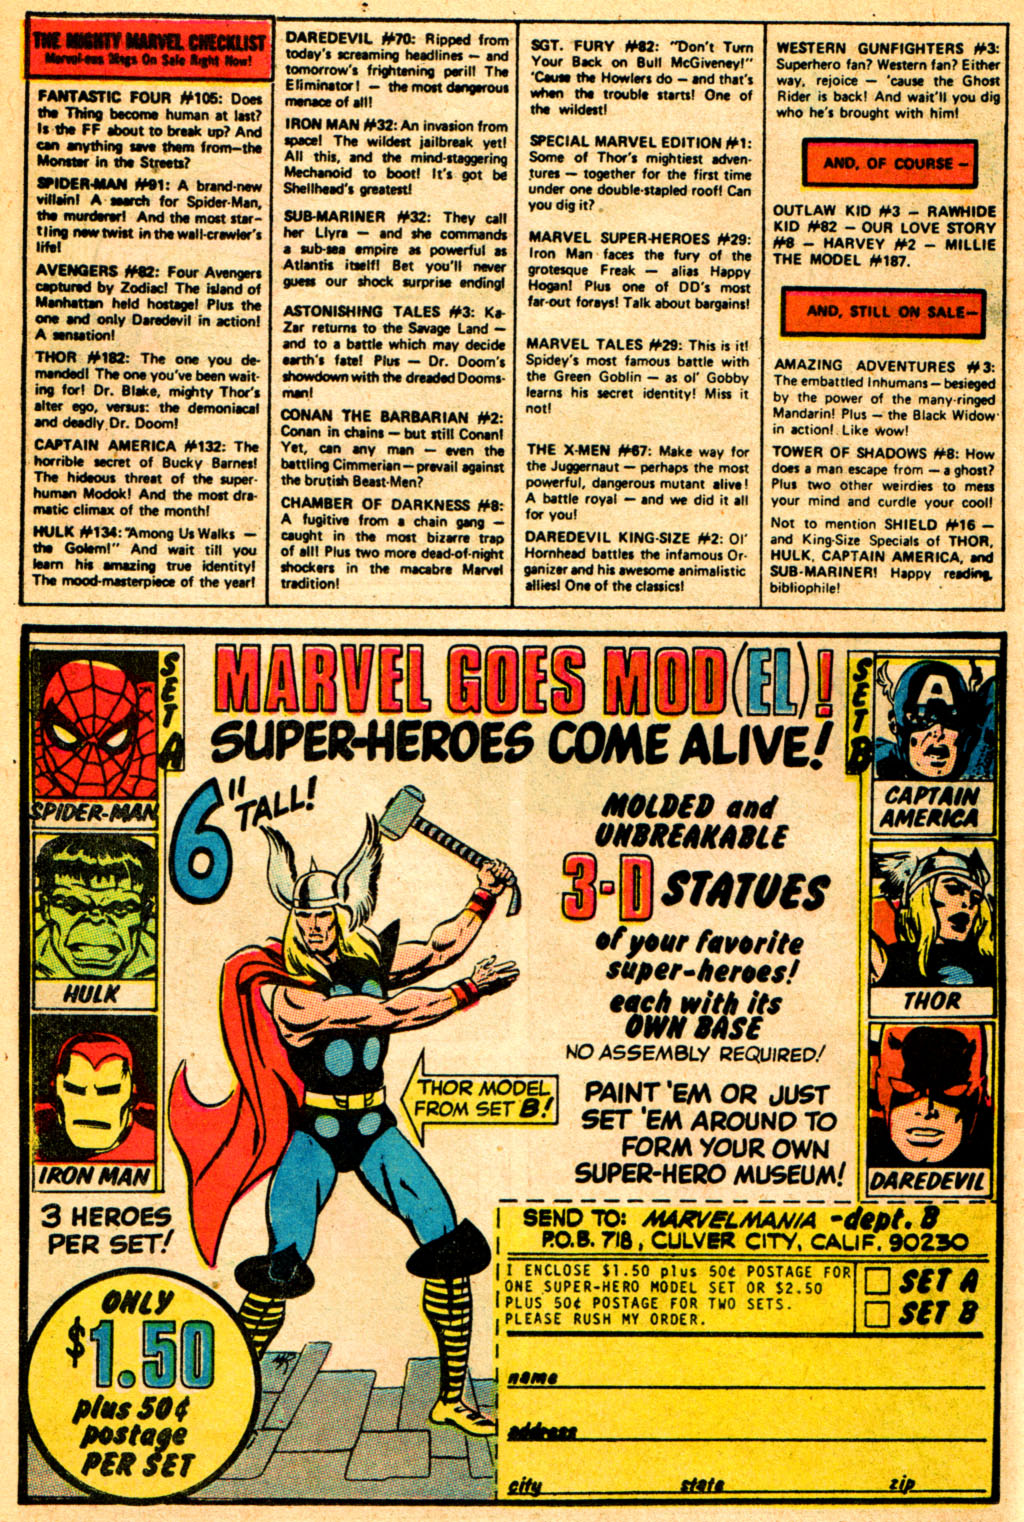 Special Marvel Edition Issue #1 #1 - English 49